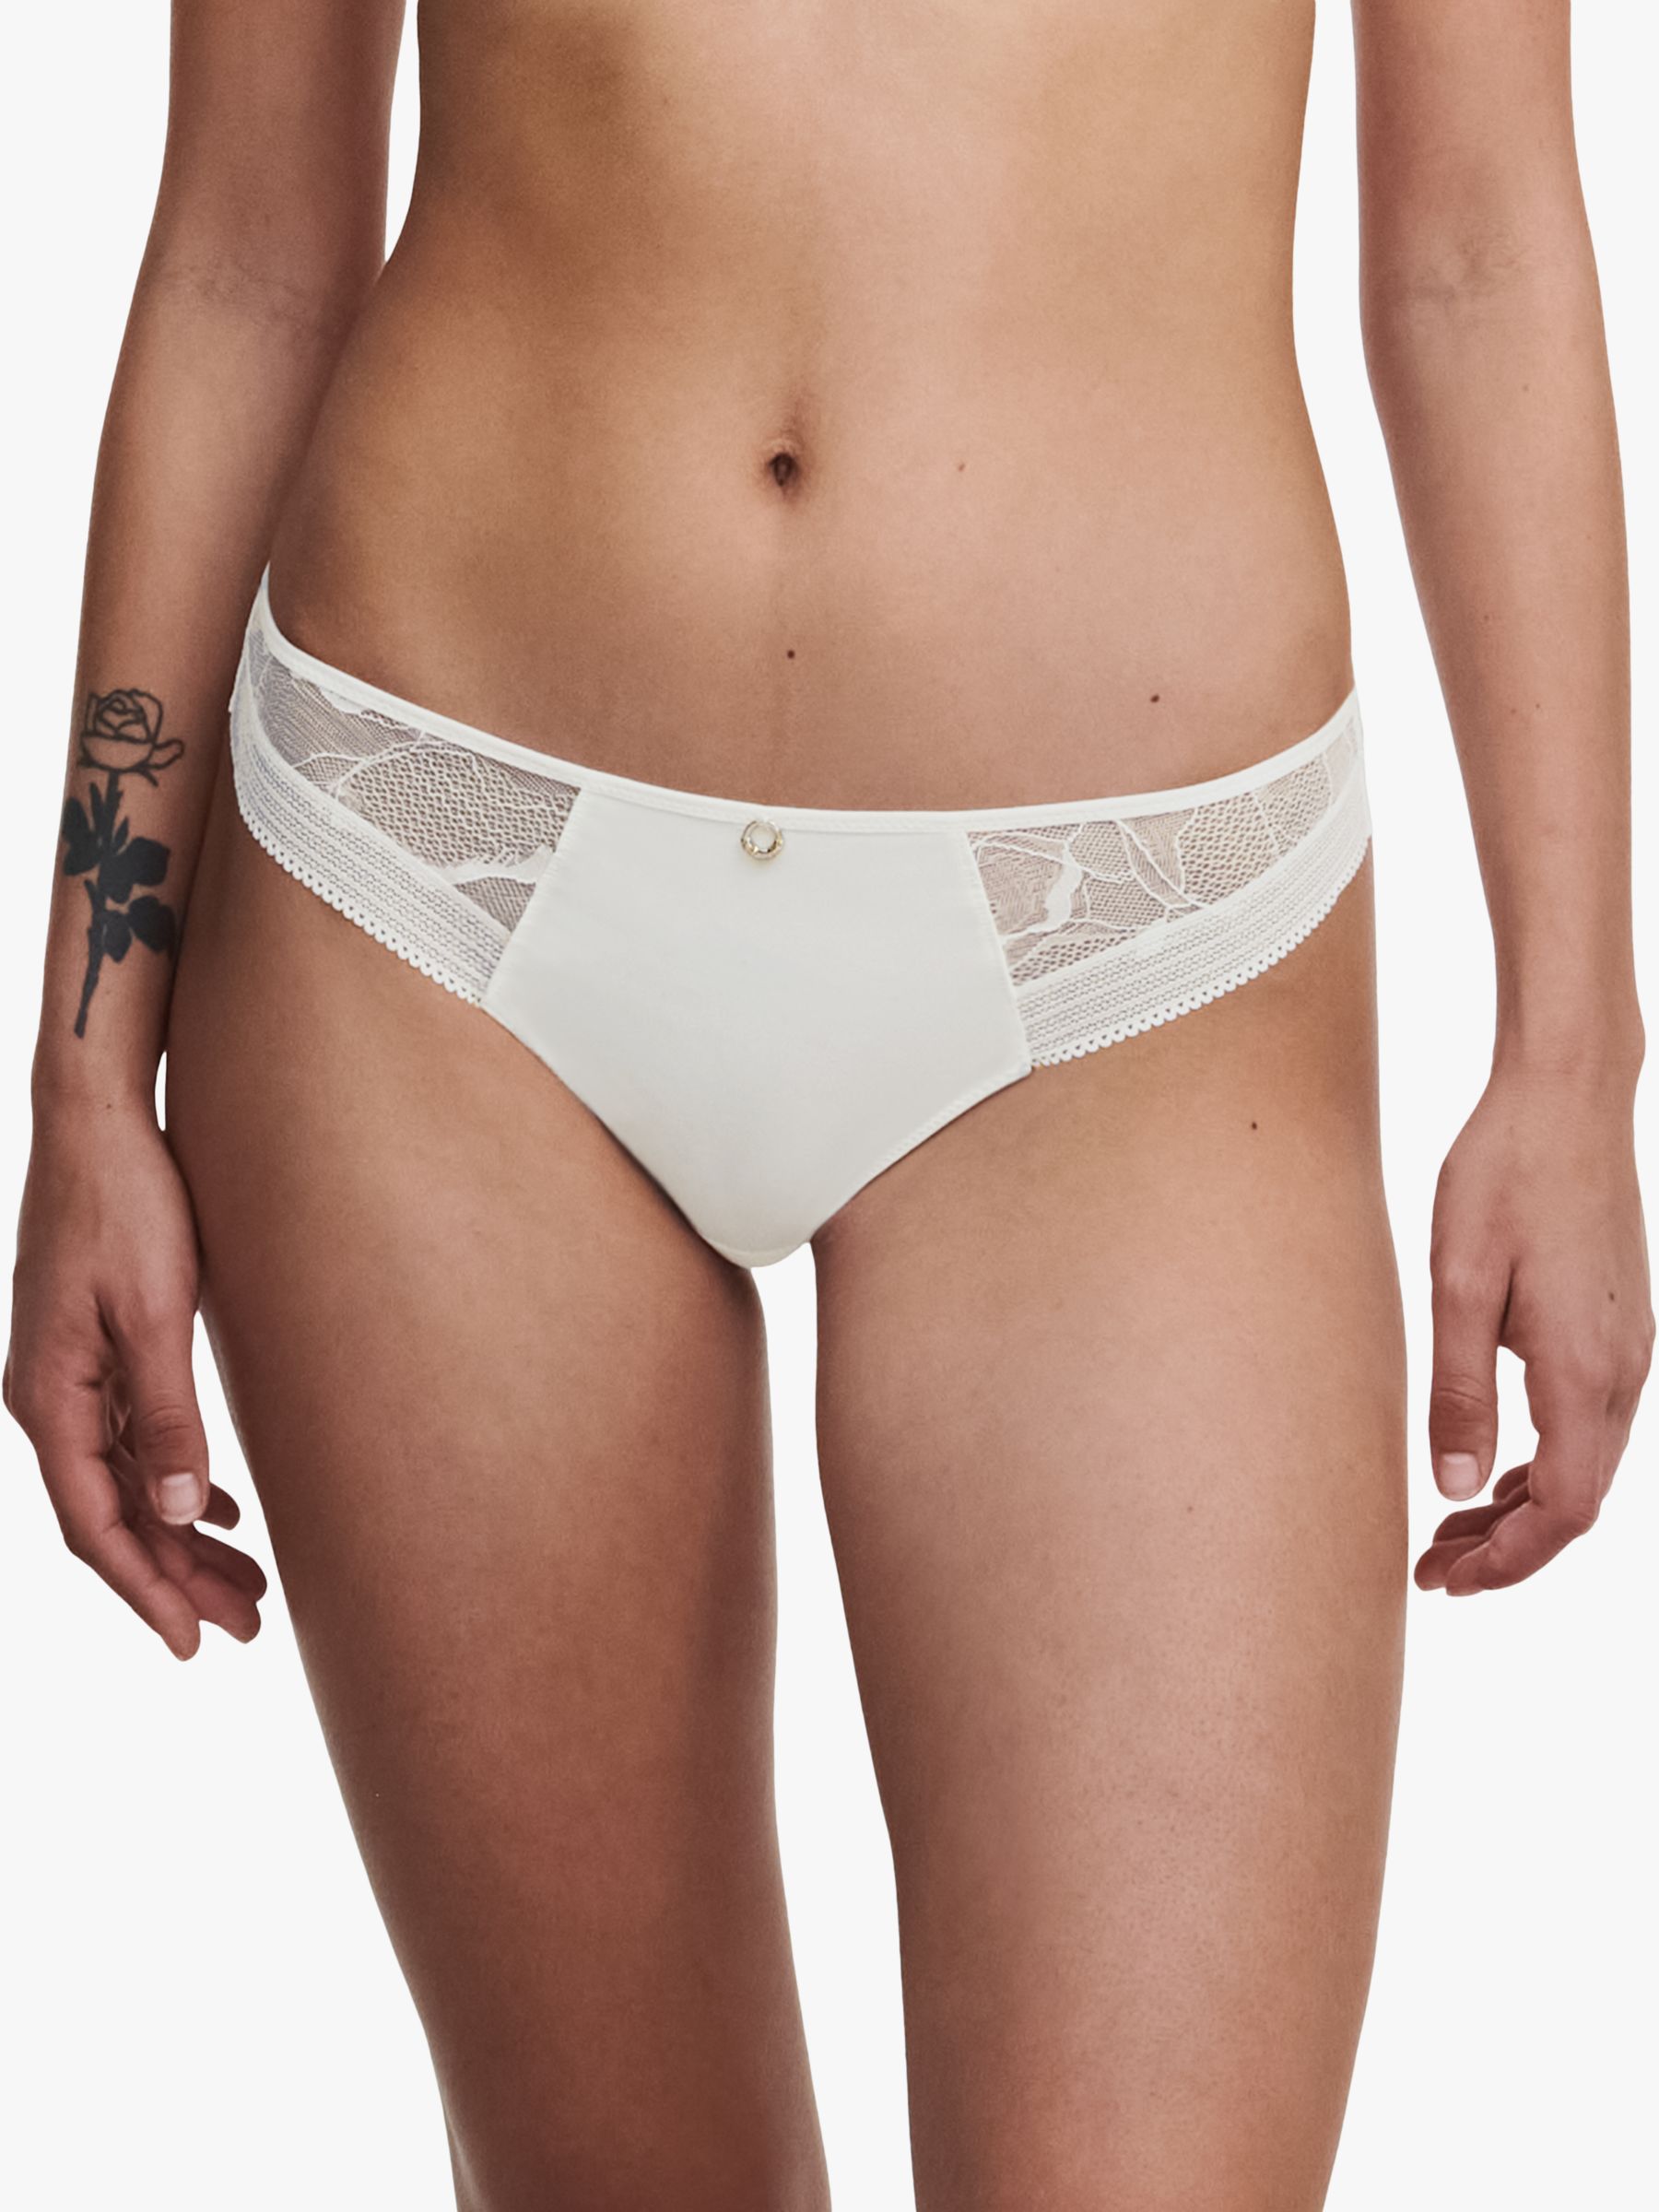 Buy Chantelle True Lace Tanga Knickers Online at johnlewis.com